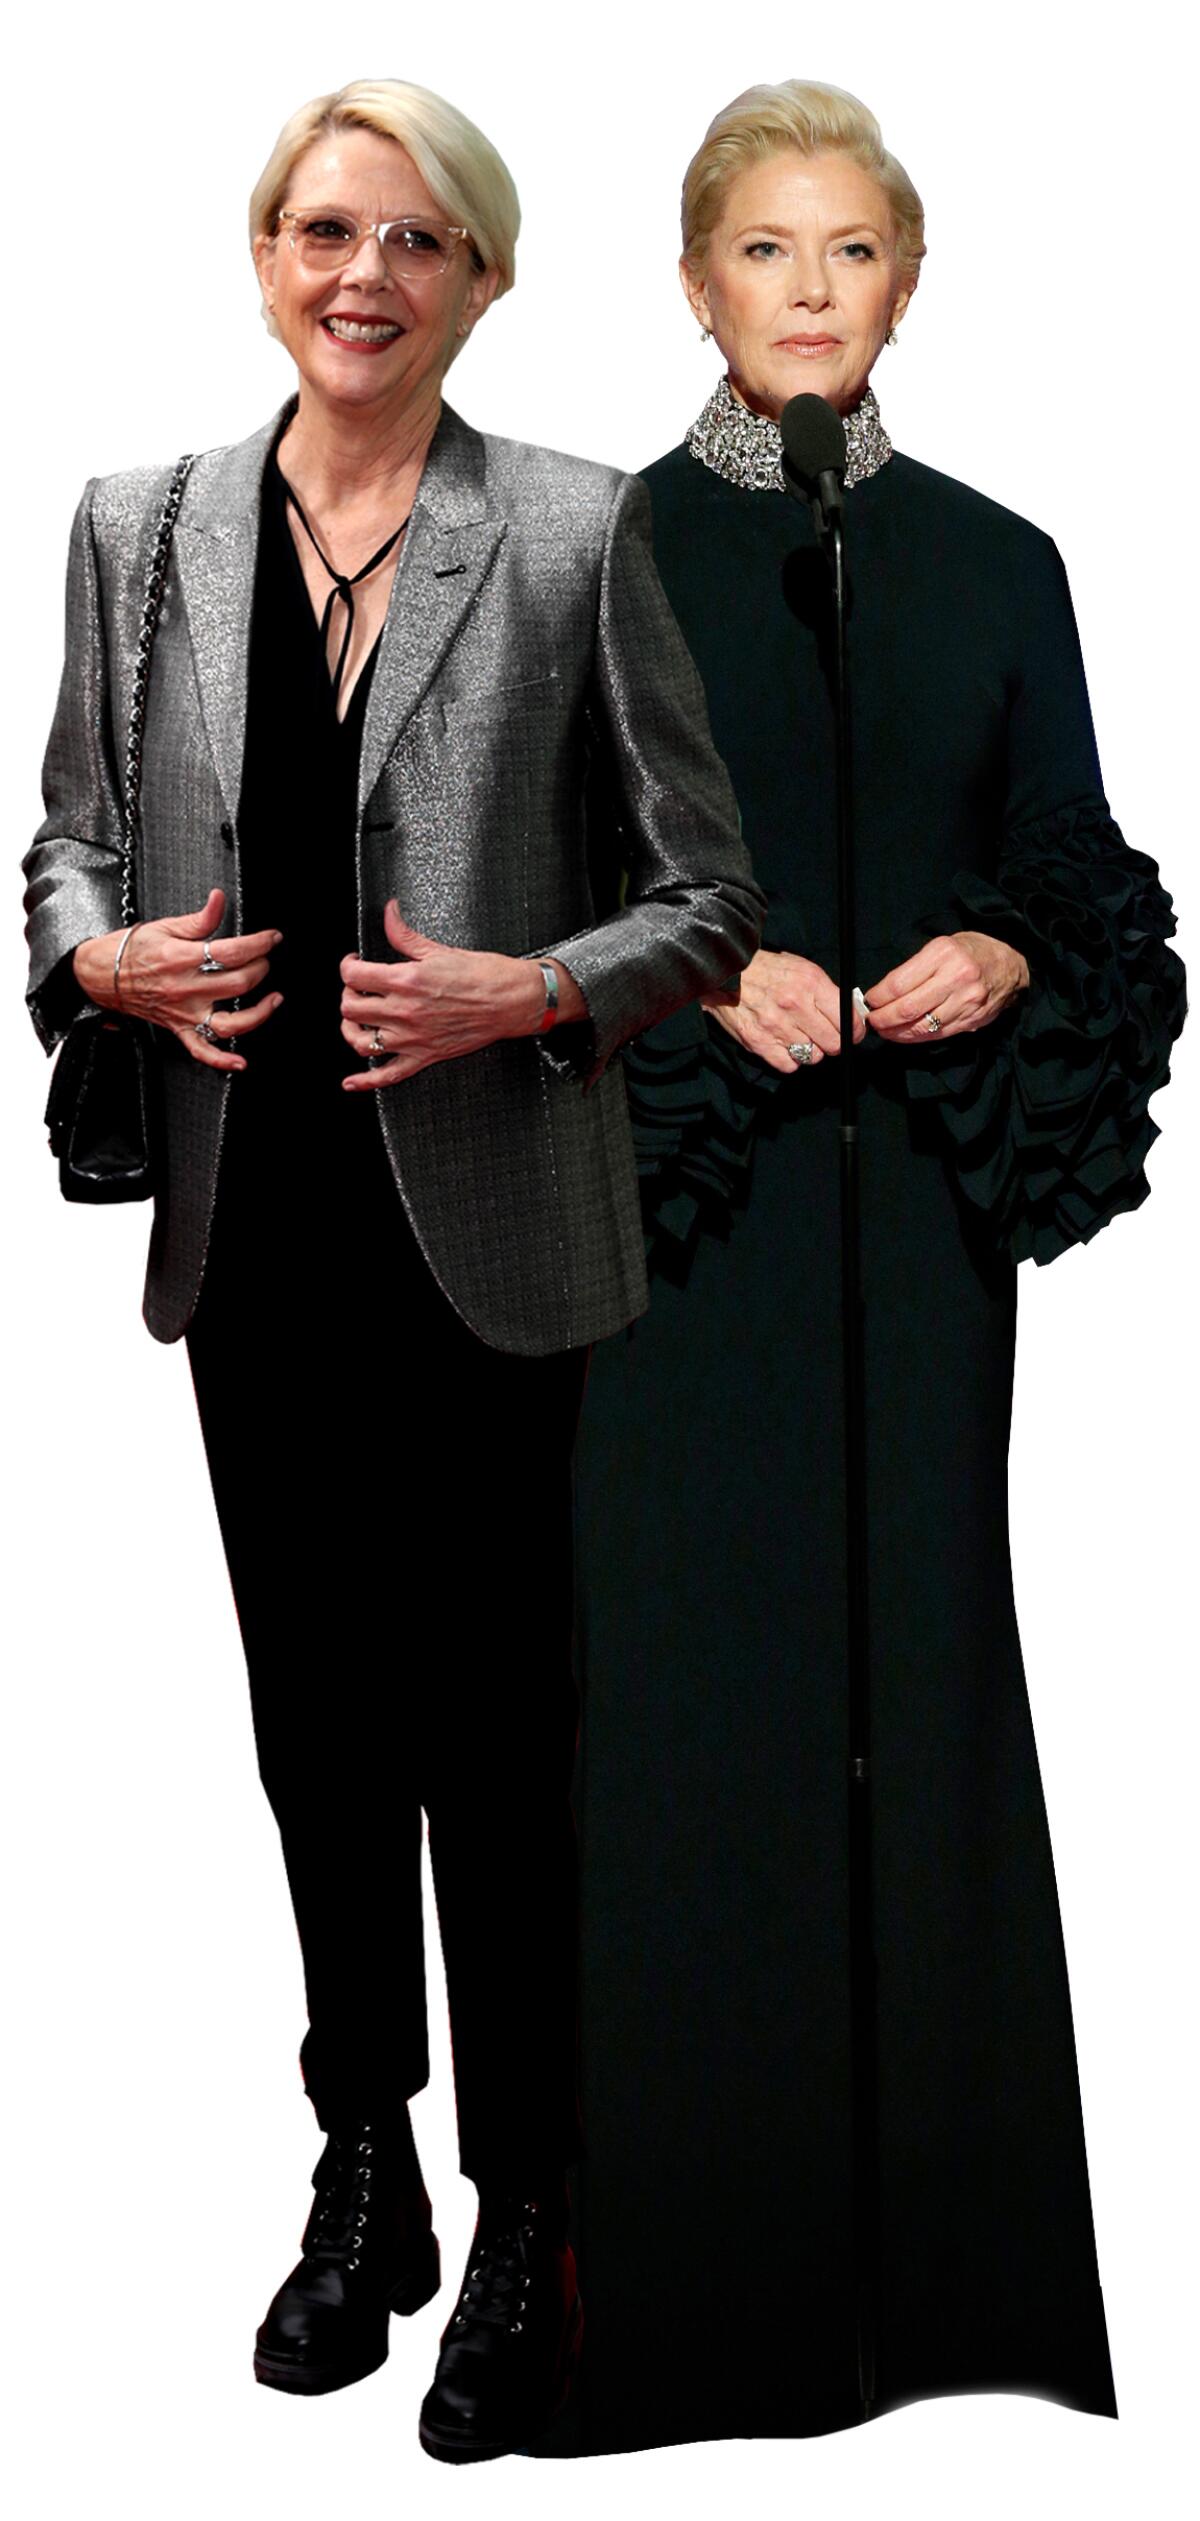 Two images of Annette Bening. In one she wears a black gown, in the other a blazer and slacks.